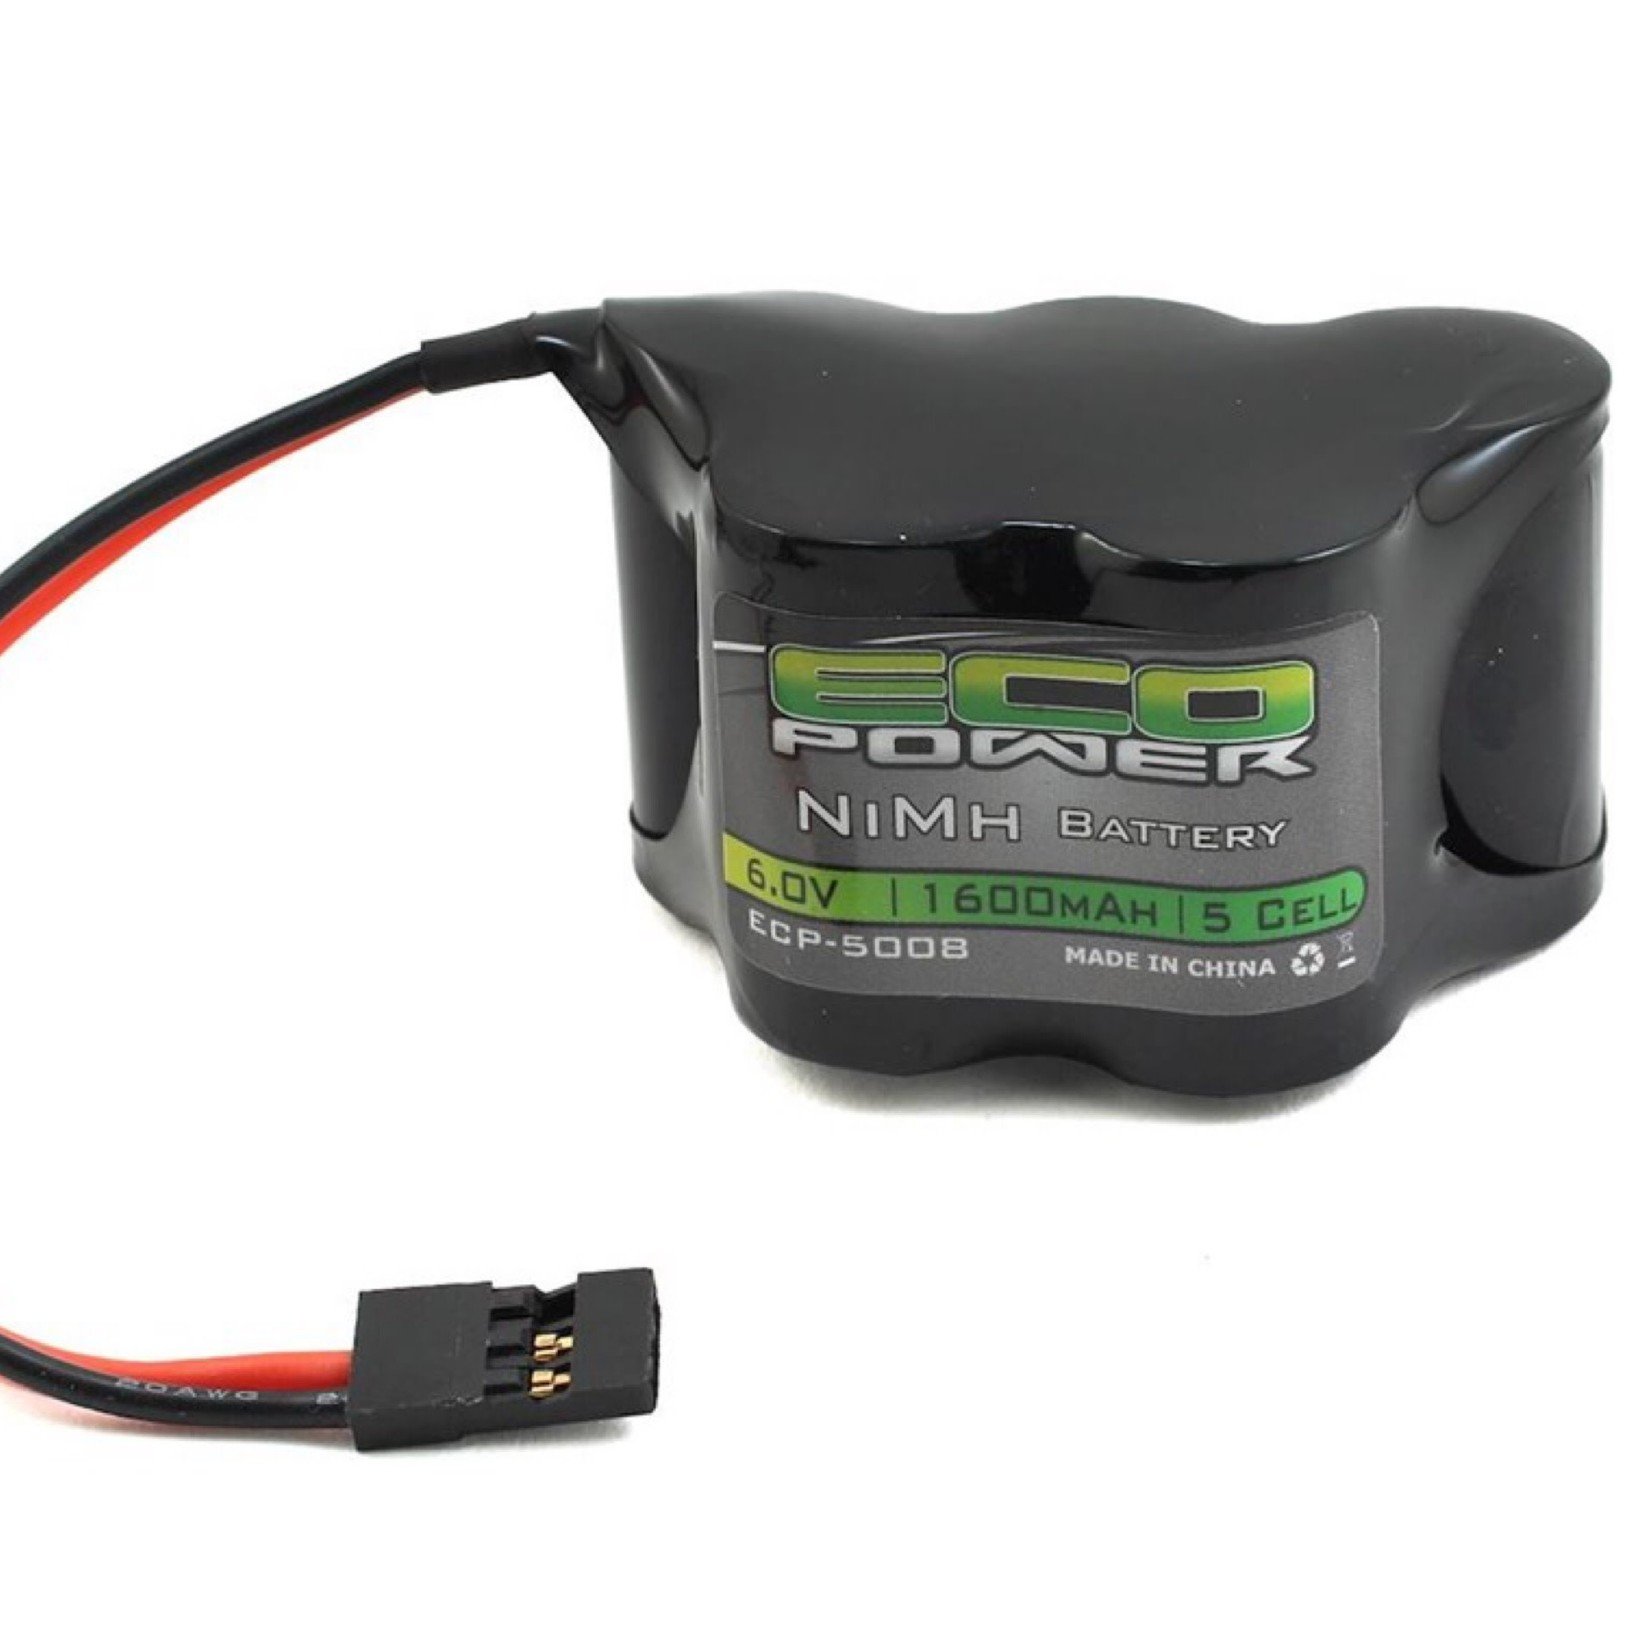 EcoPower EcoPower 5-Cell NiMH 2/3A Hump Receiver Battery Pack (6.0V/1600mAh) #ECP-5008